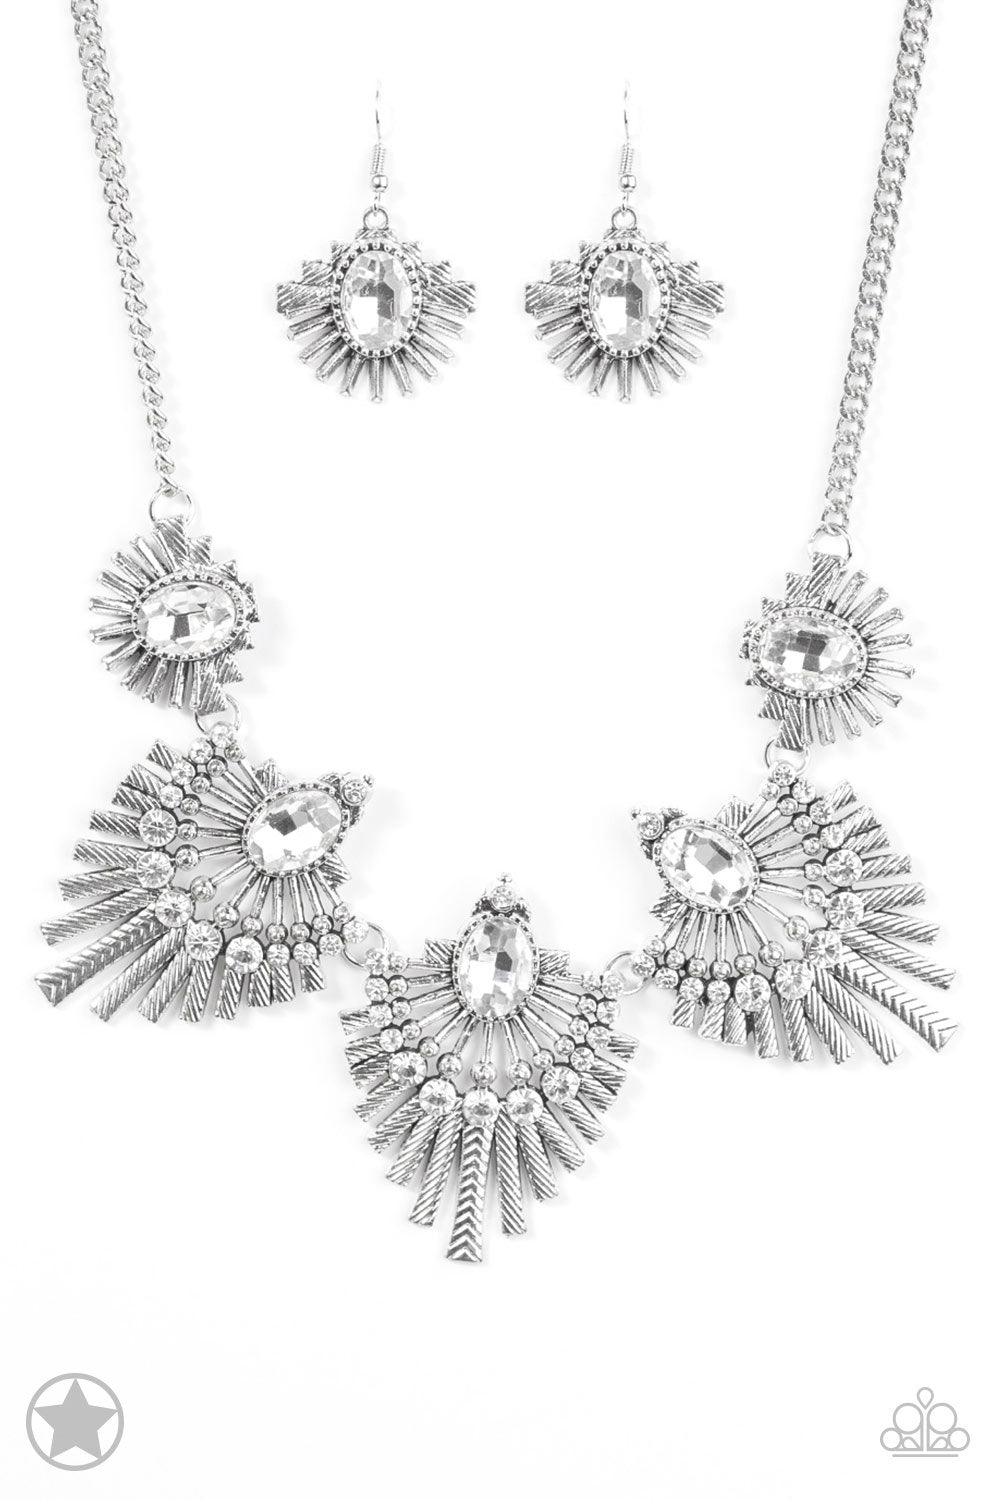 Textured metal bars flare out from a mesmerizing gem, creating a fringe of fanning frames. Sprinkled with matching white rhinestones, the dazzling display falls just below the collar for a sassy finish. Features an adjustable clasp closure.